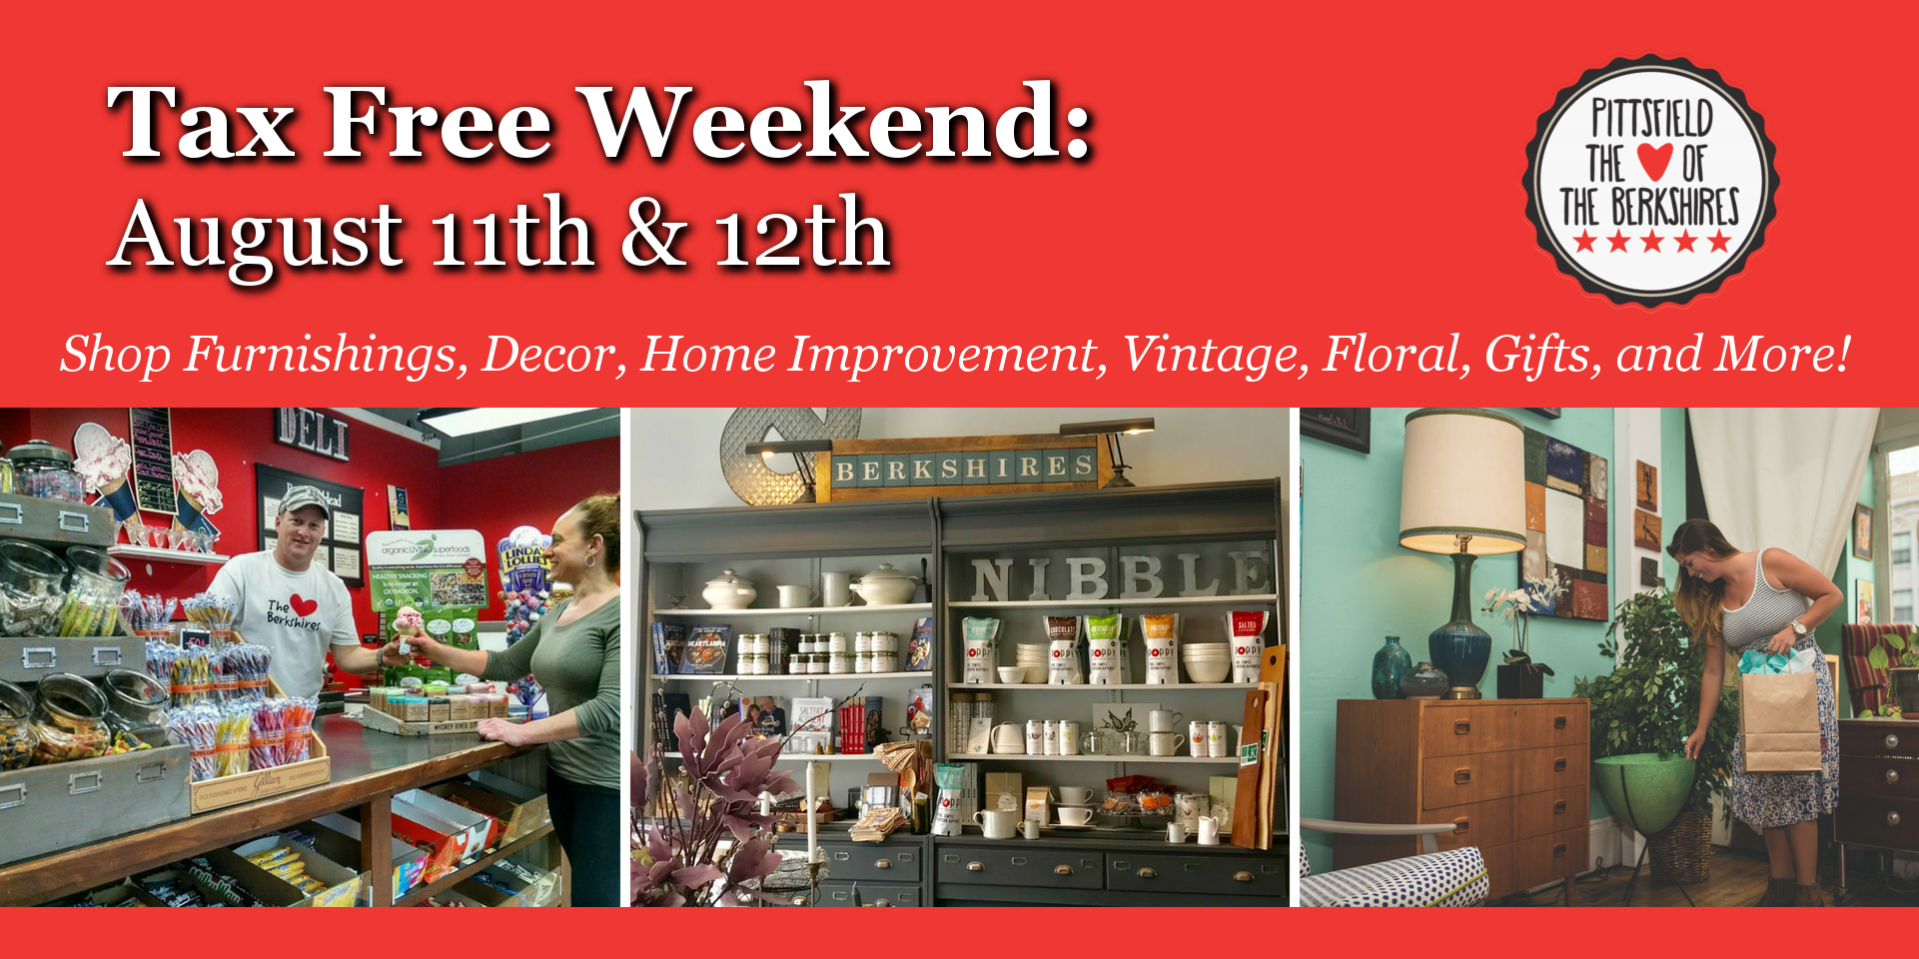 Tax Free Weekend Downtown Shopping Guide! Downtown Pittsfield Western